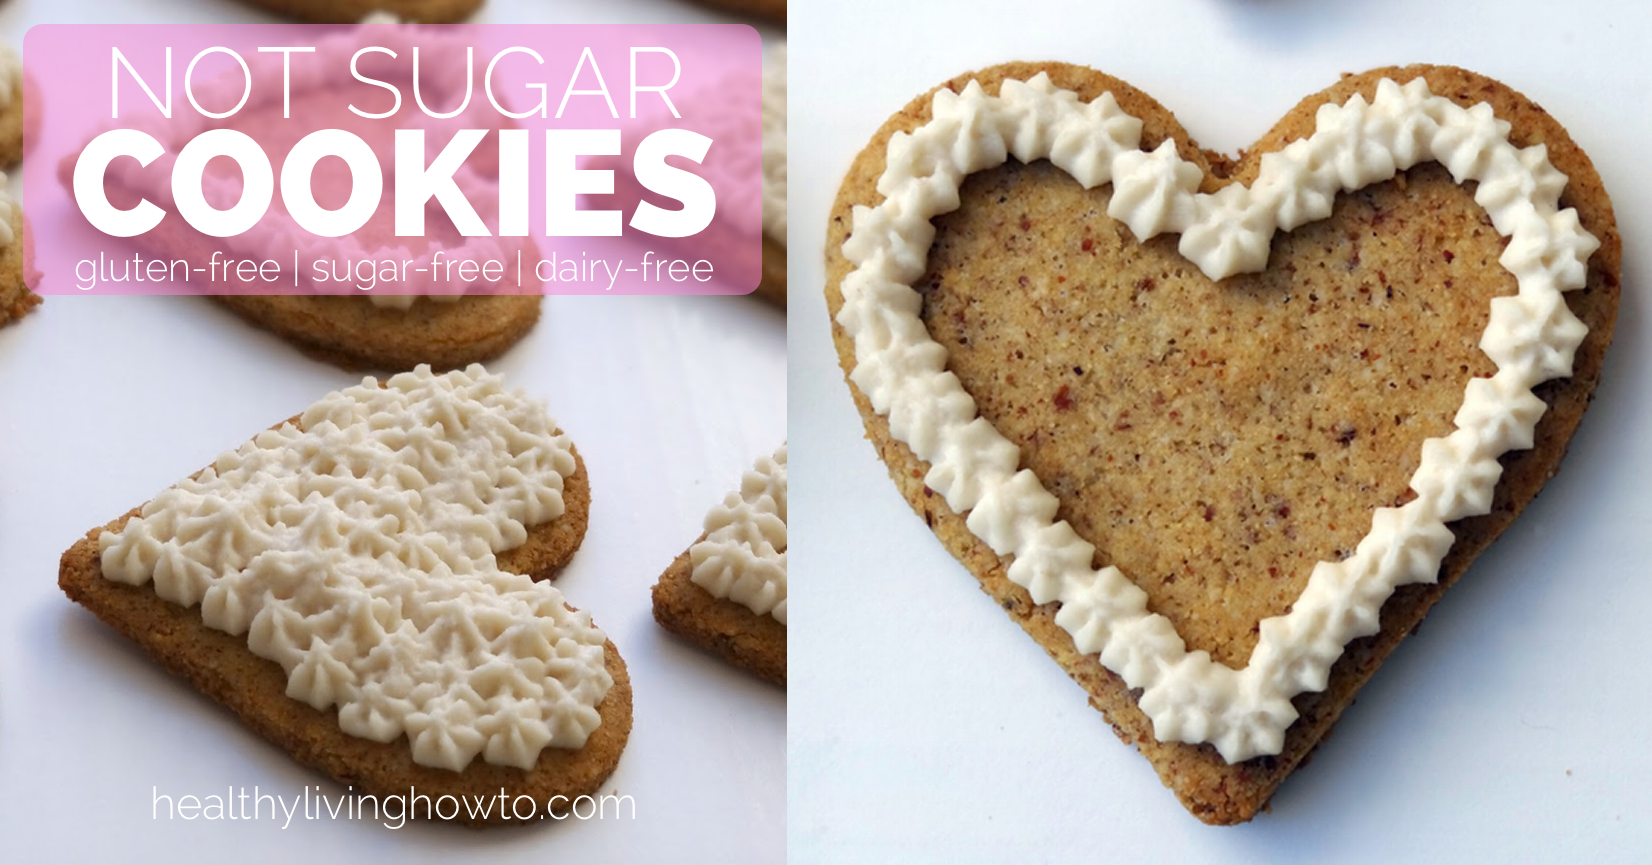 Not Sugar Cookies | healthylivinghowto.com